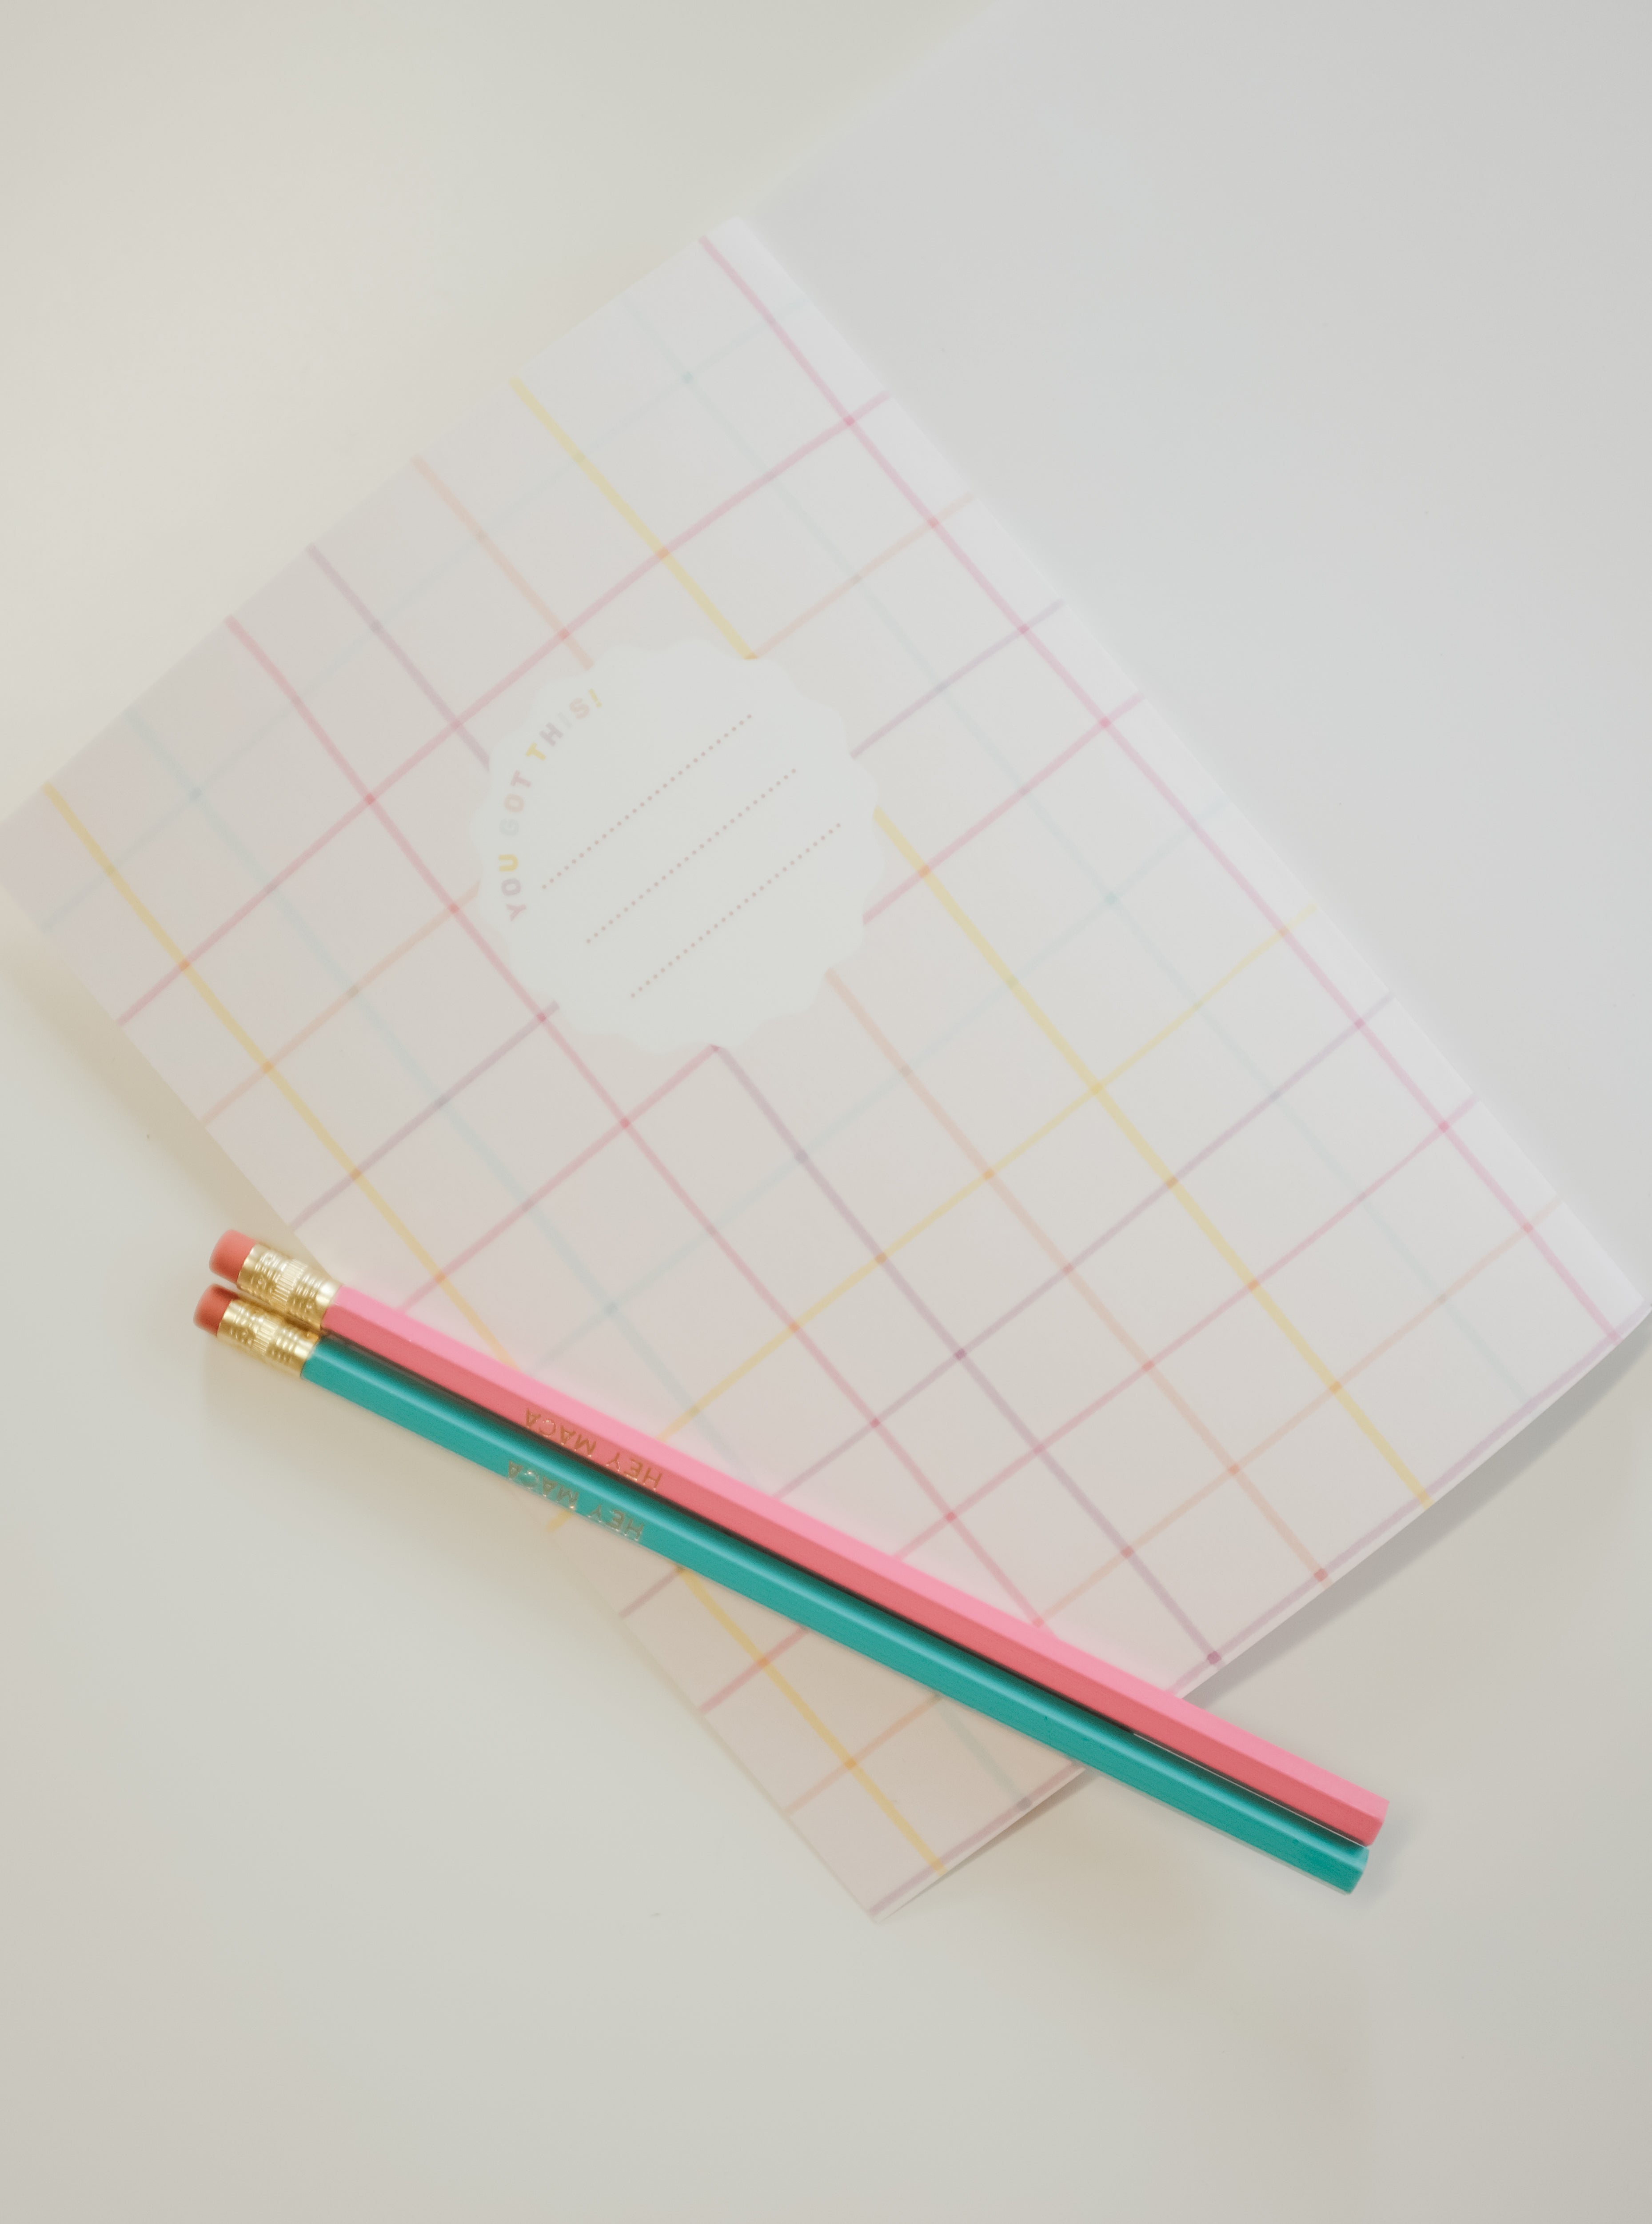 Our Sweet Notebook You Need To Sketch Your Brilliant Ideas, Now